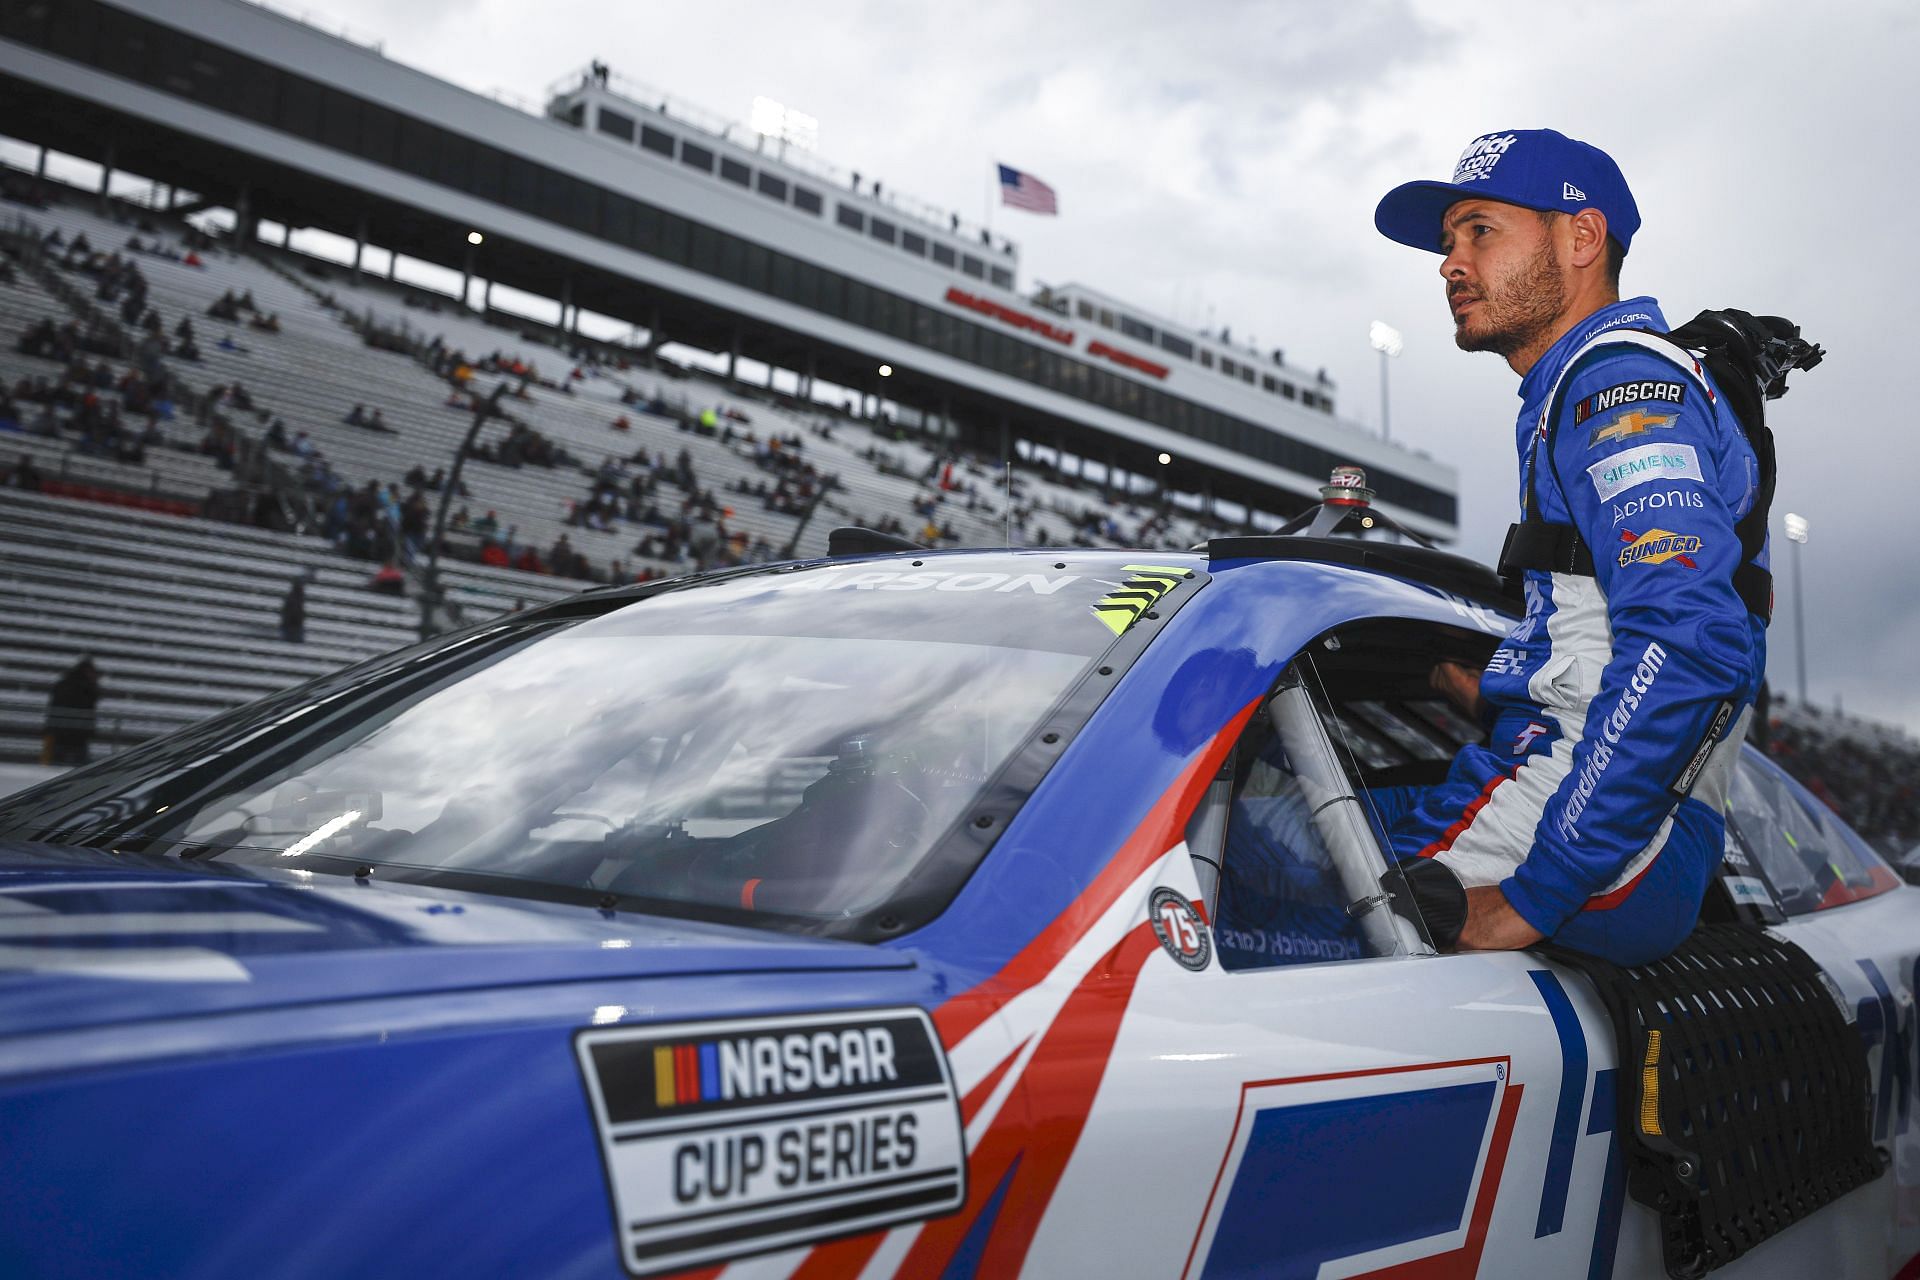 Kyle Larson enters his car during qualifying for the NASCAR Cup Series Blue-Emu Maximum Pain Relief 400 at Martinsville Speedway (Photo by Jared C. Tilton/Getty Images)